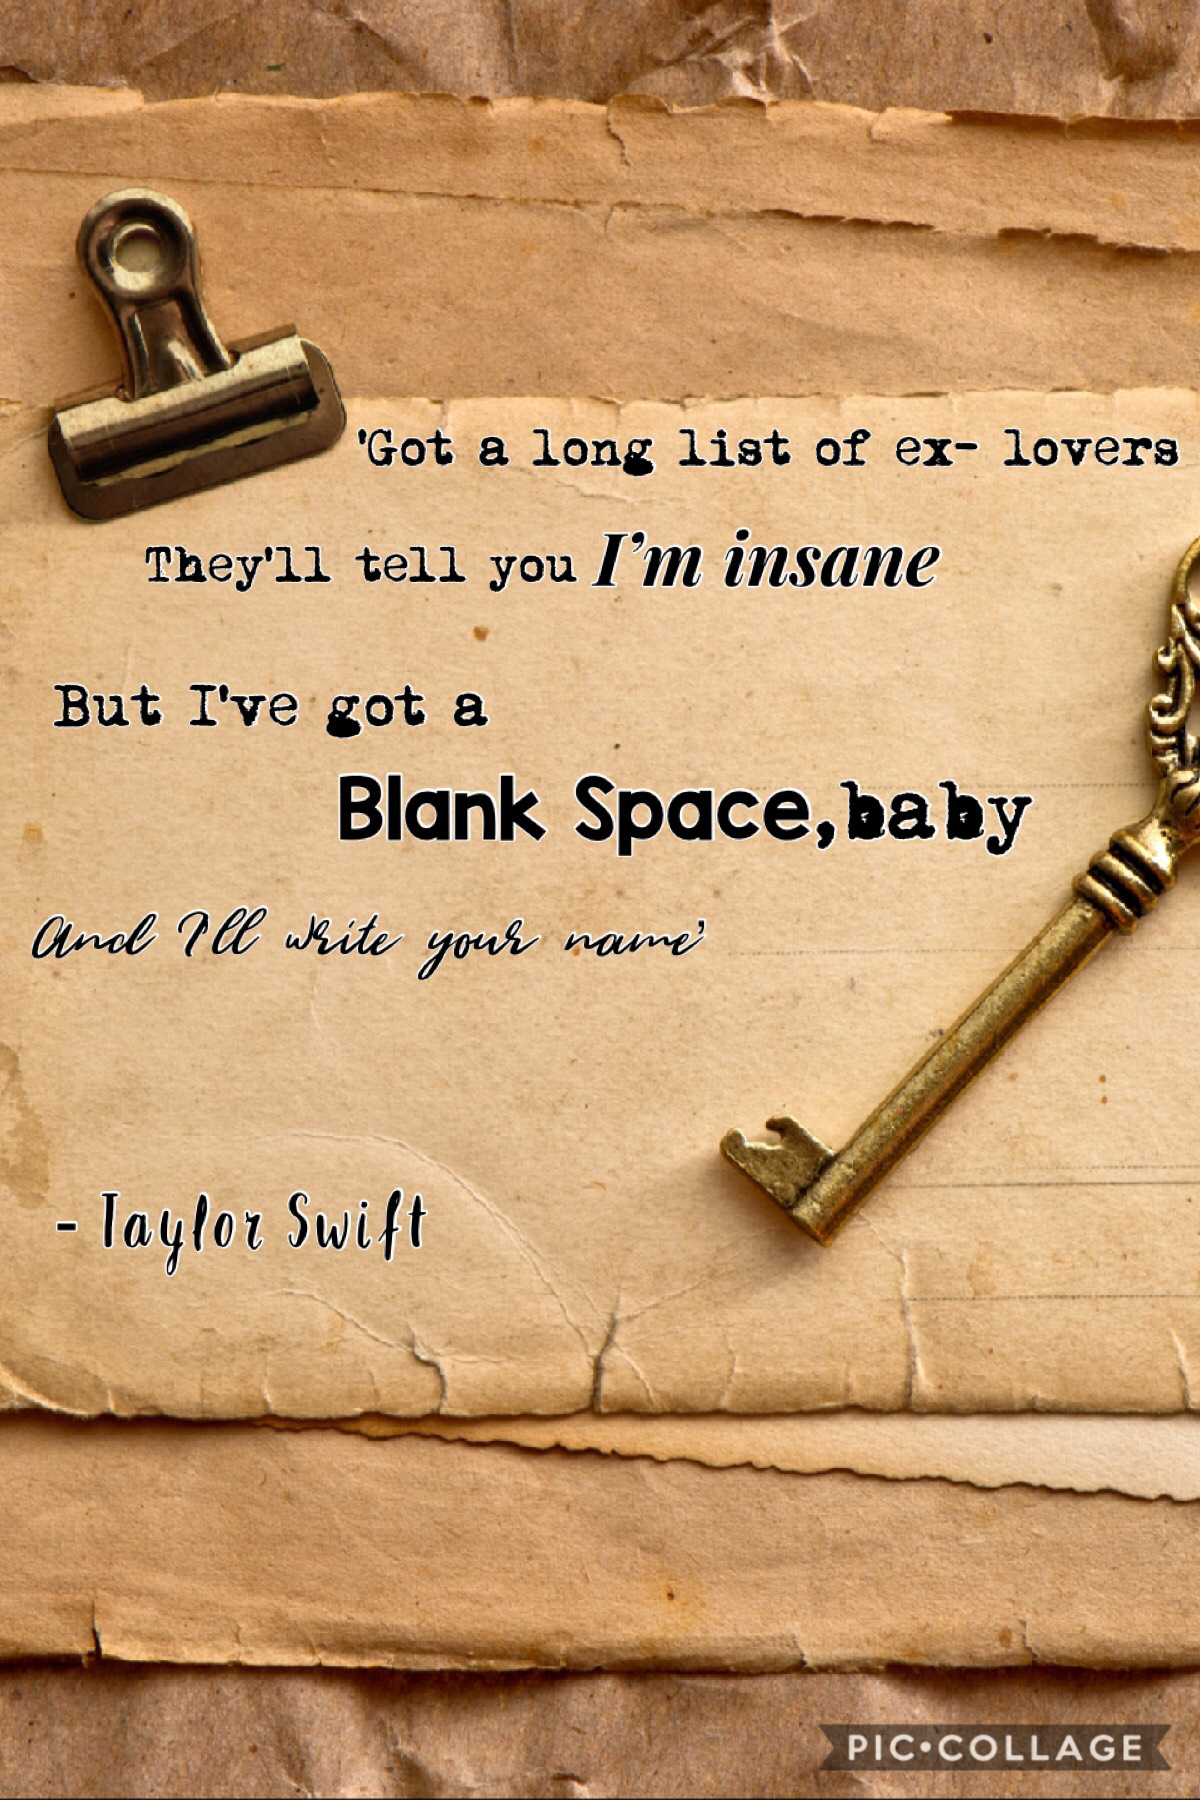 Blank space 